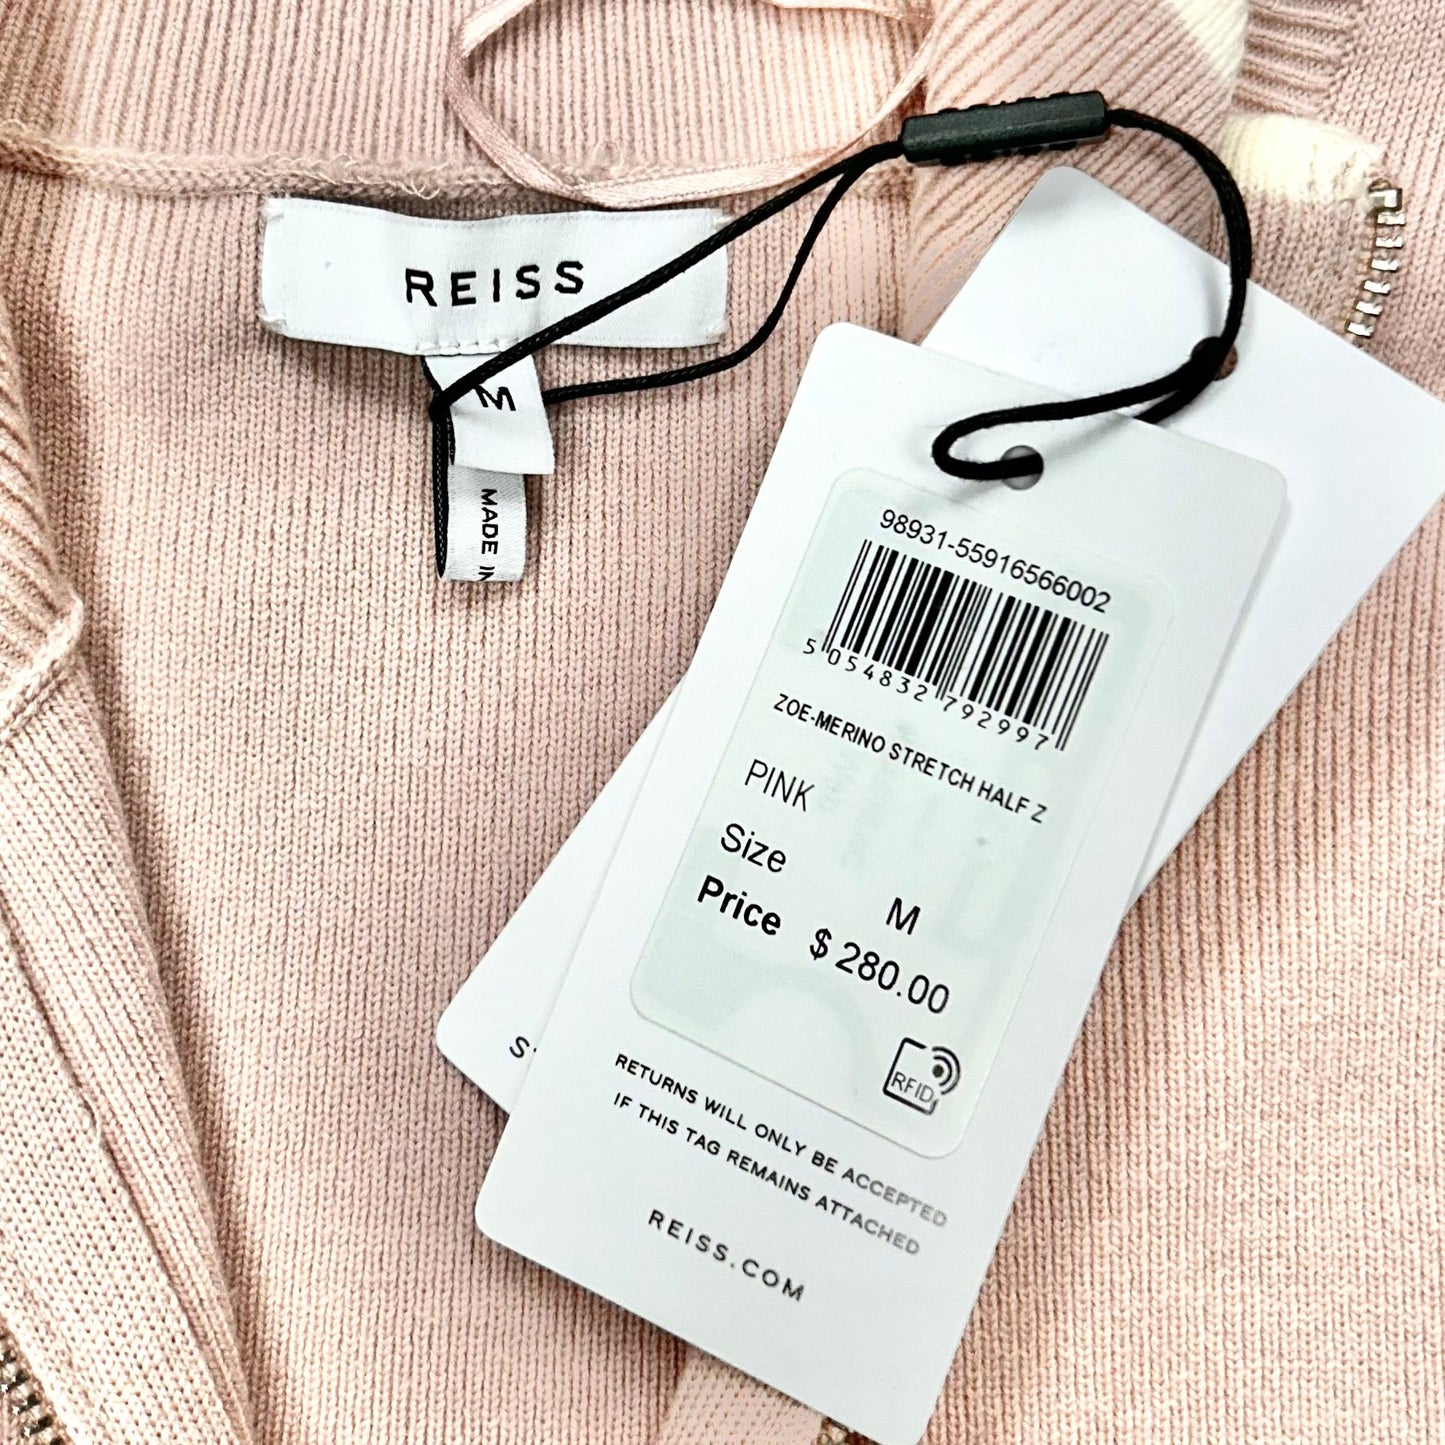 Sweater Designer By Reiss  Size: M